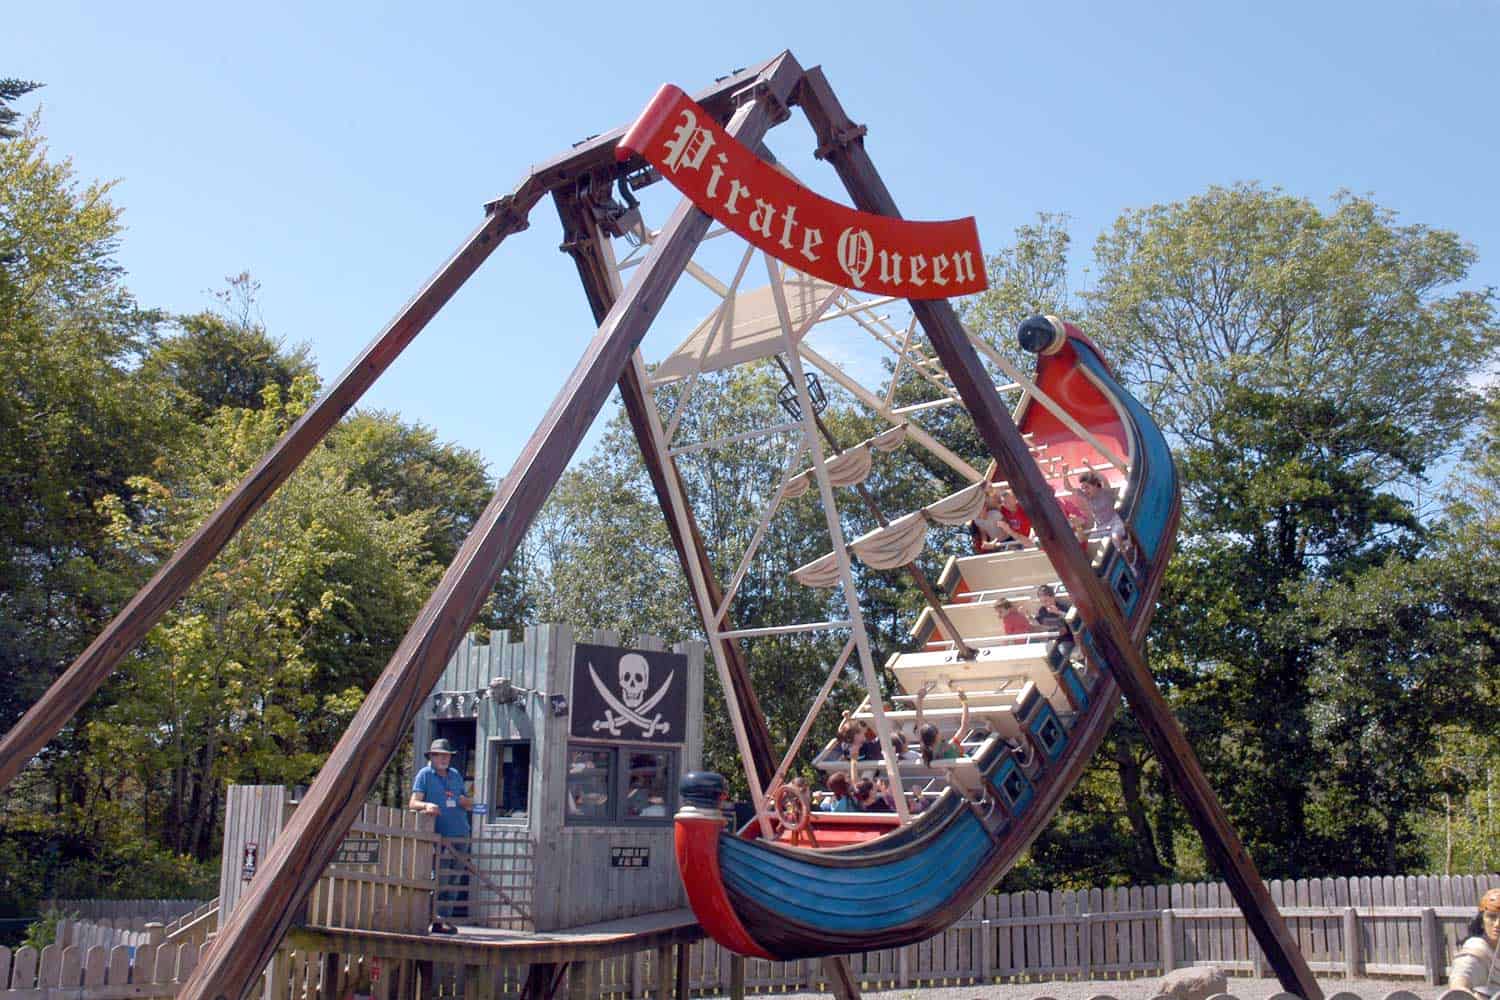 Take one last family trip to the Pirate Adventure Park on September 2nd 